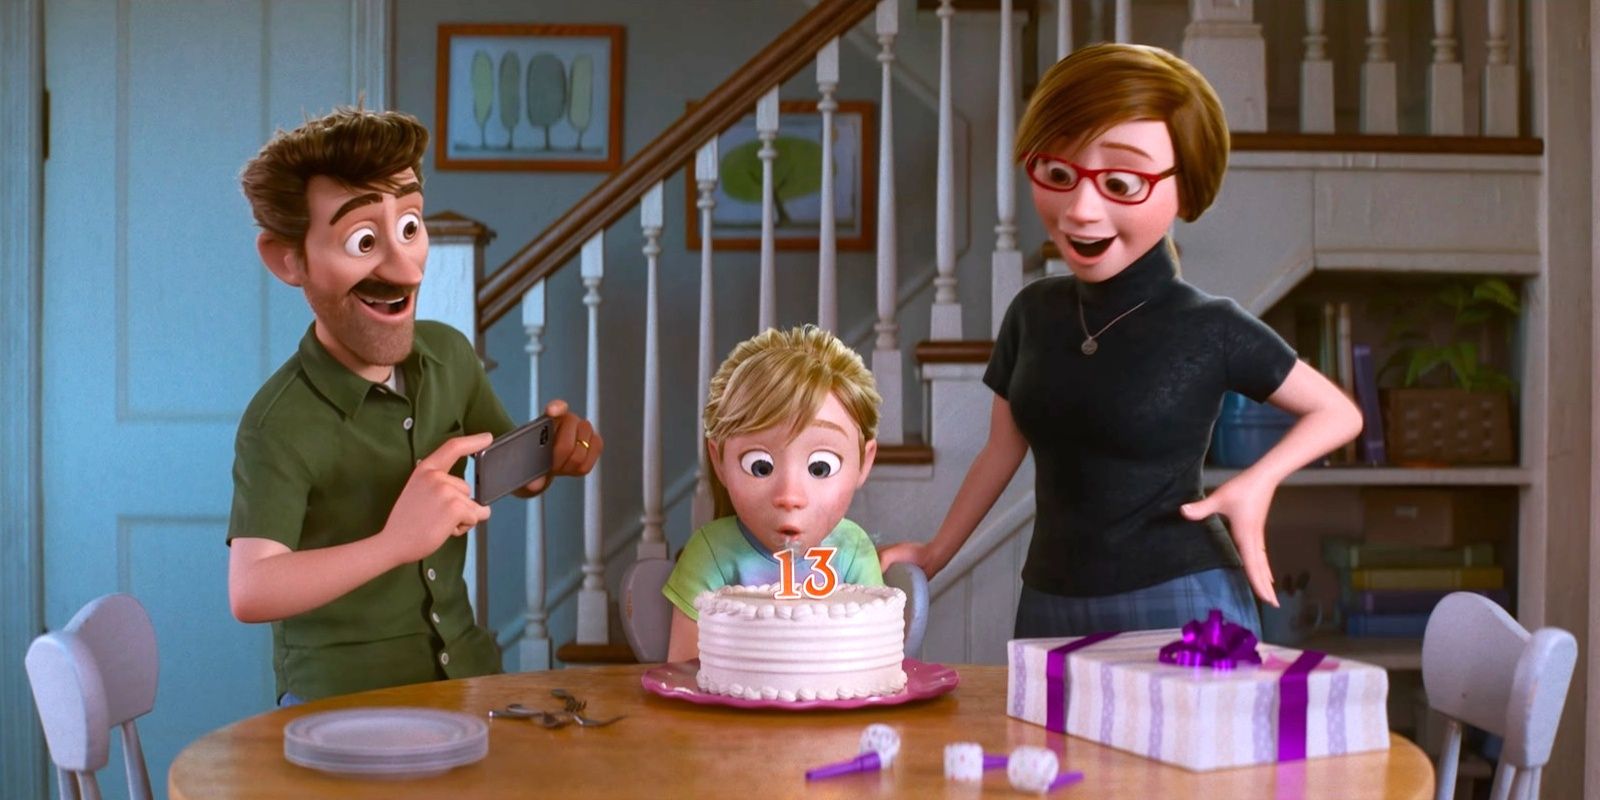 Riley and her parents celebrate her 13th birthday in Inside Out 2.